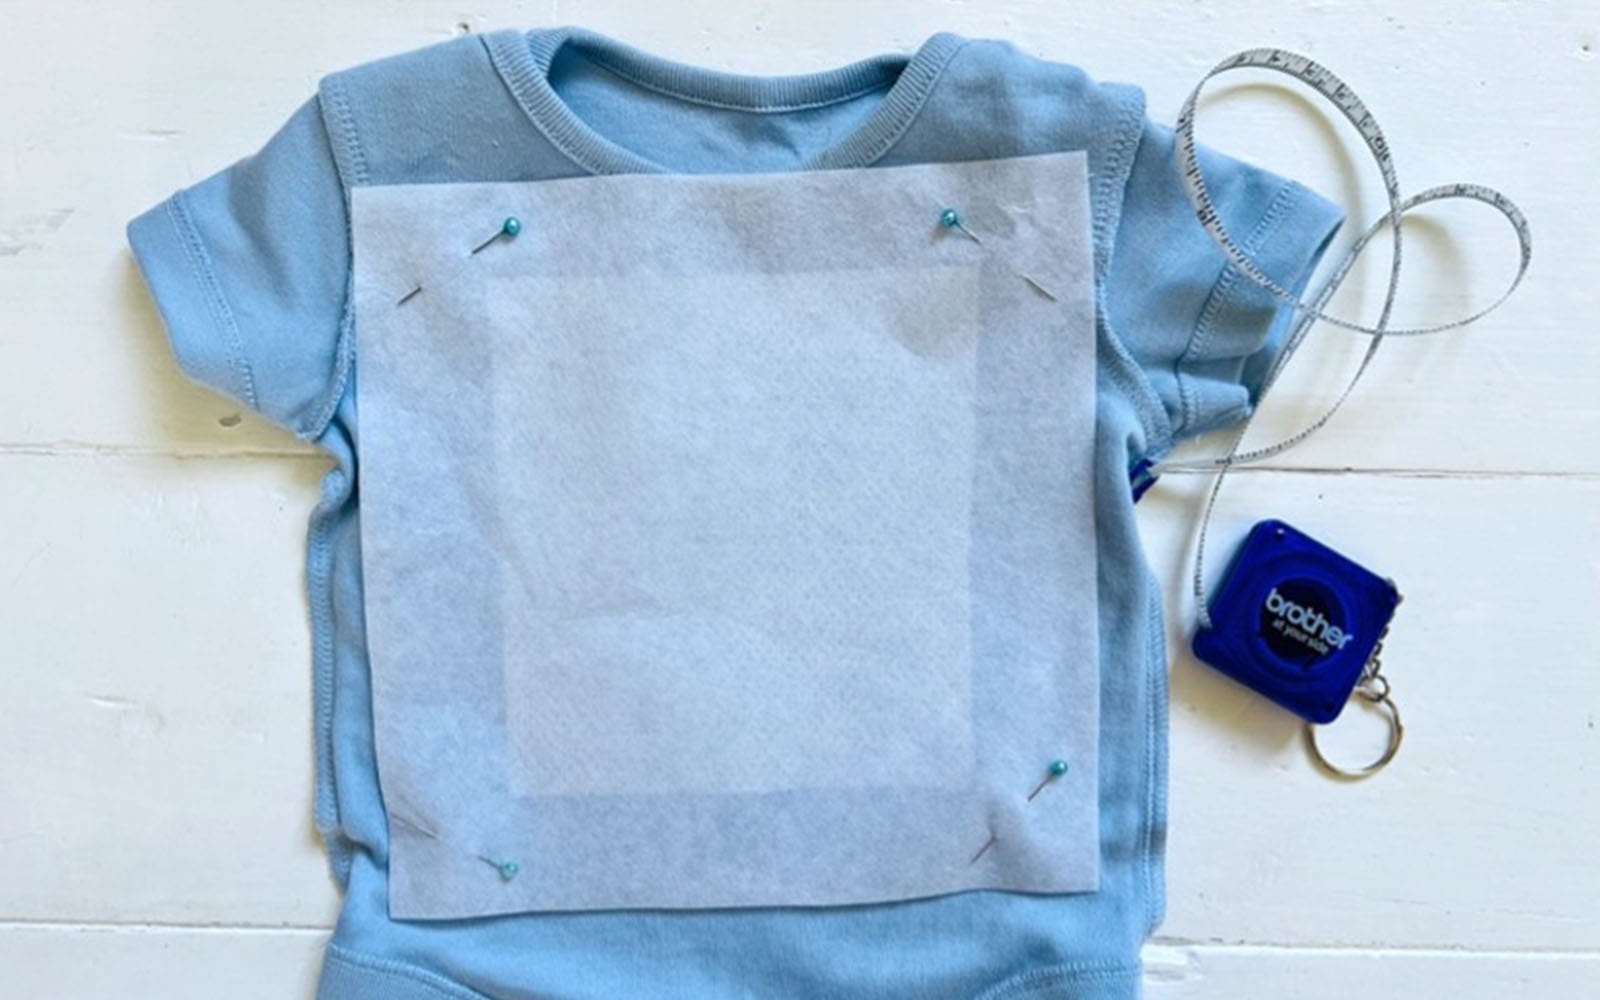 Blue babygrow with stabiliser pinned to it